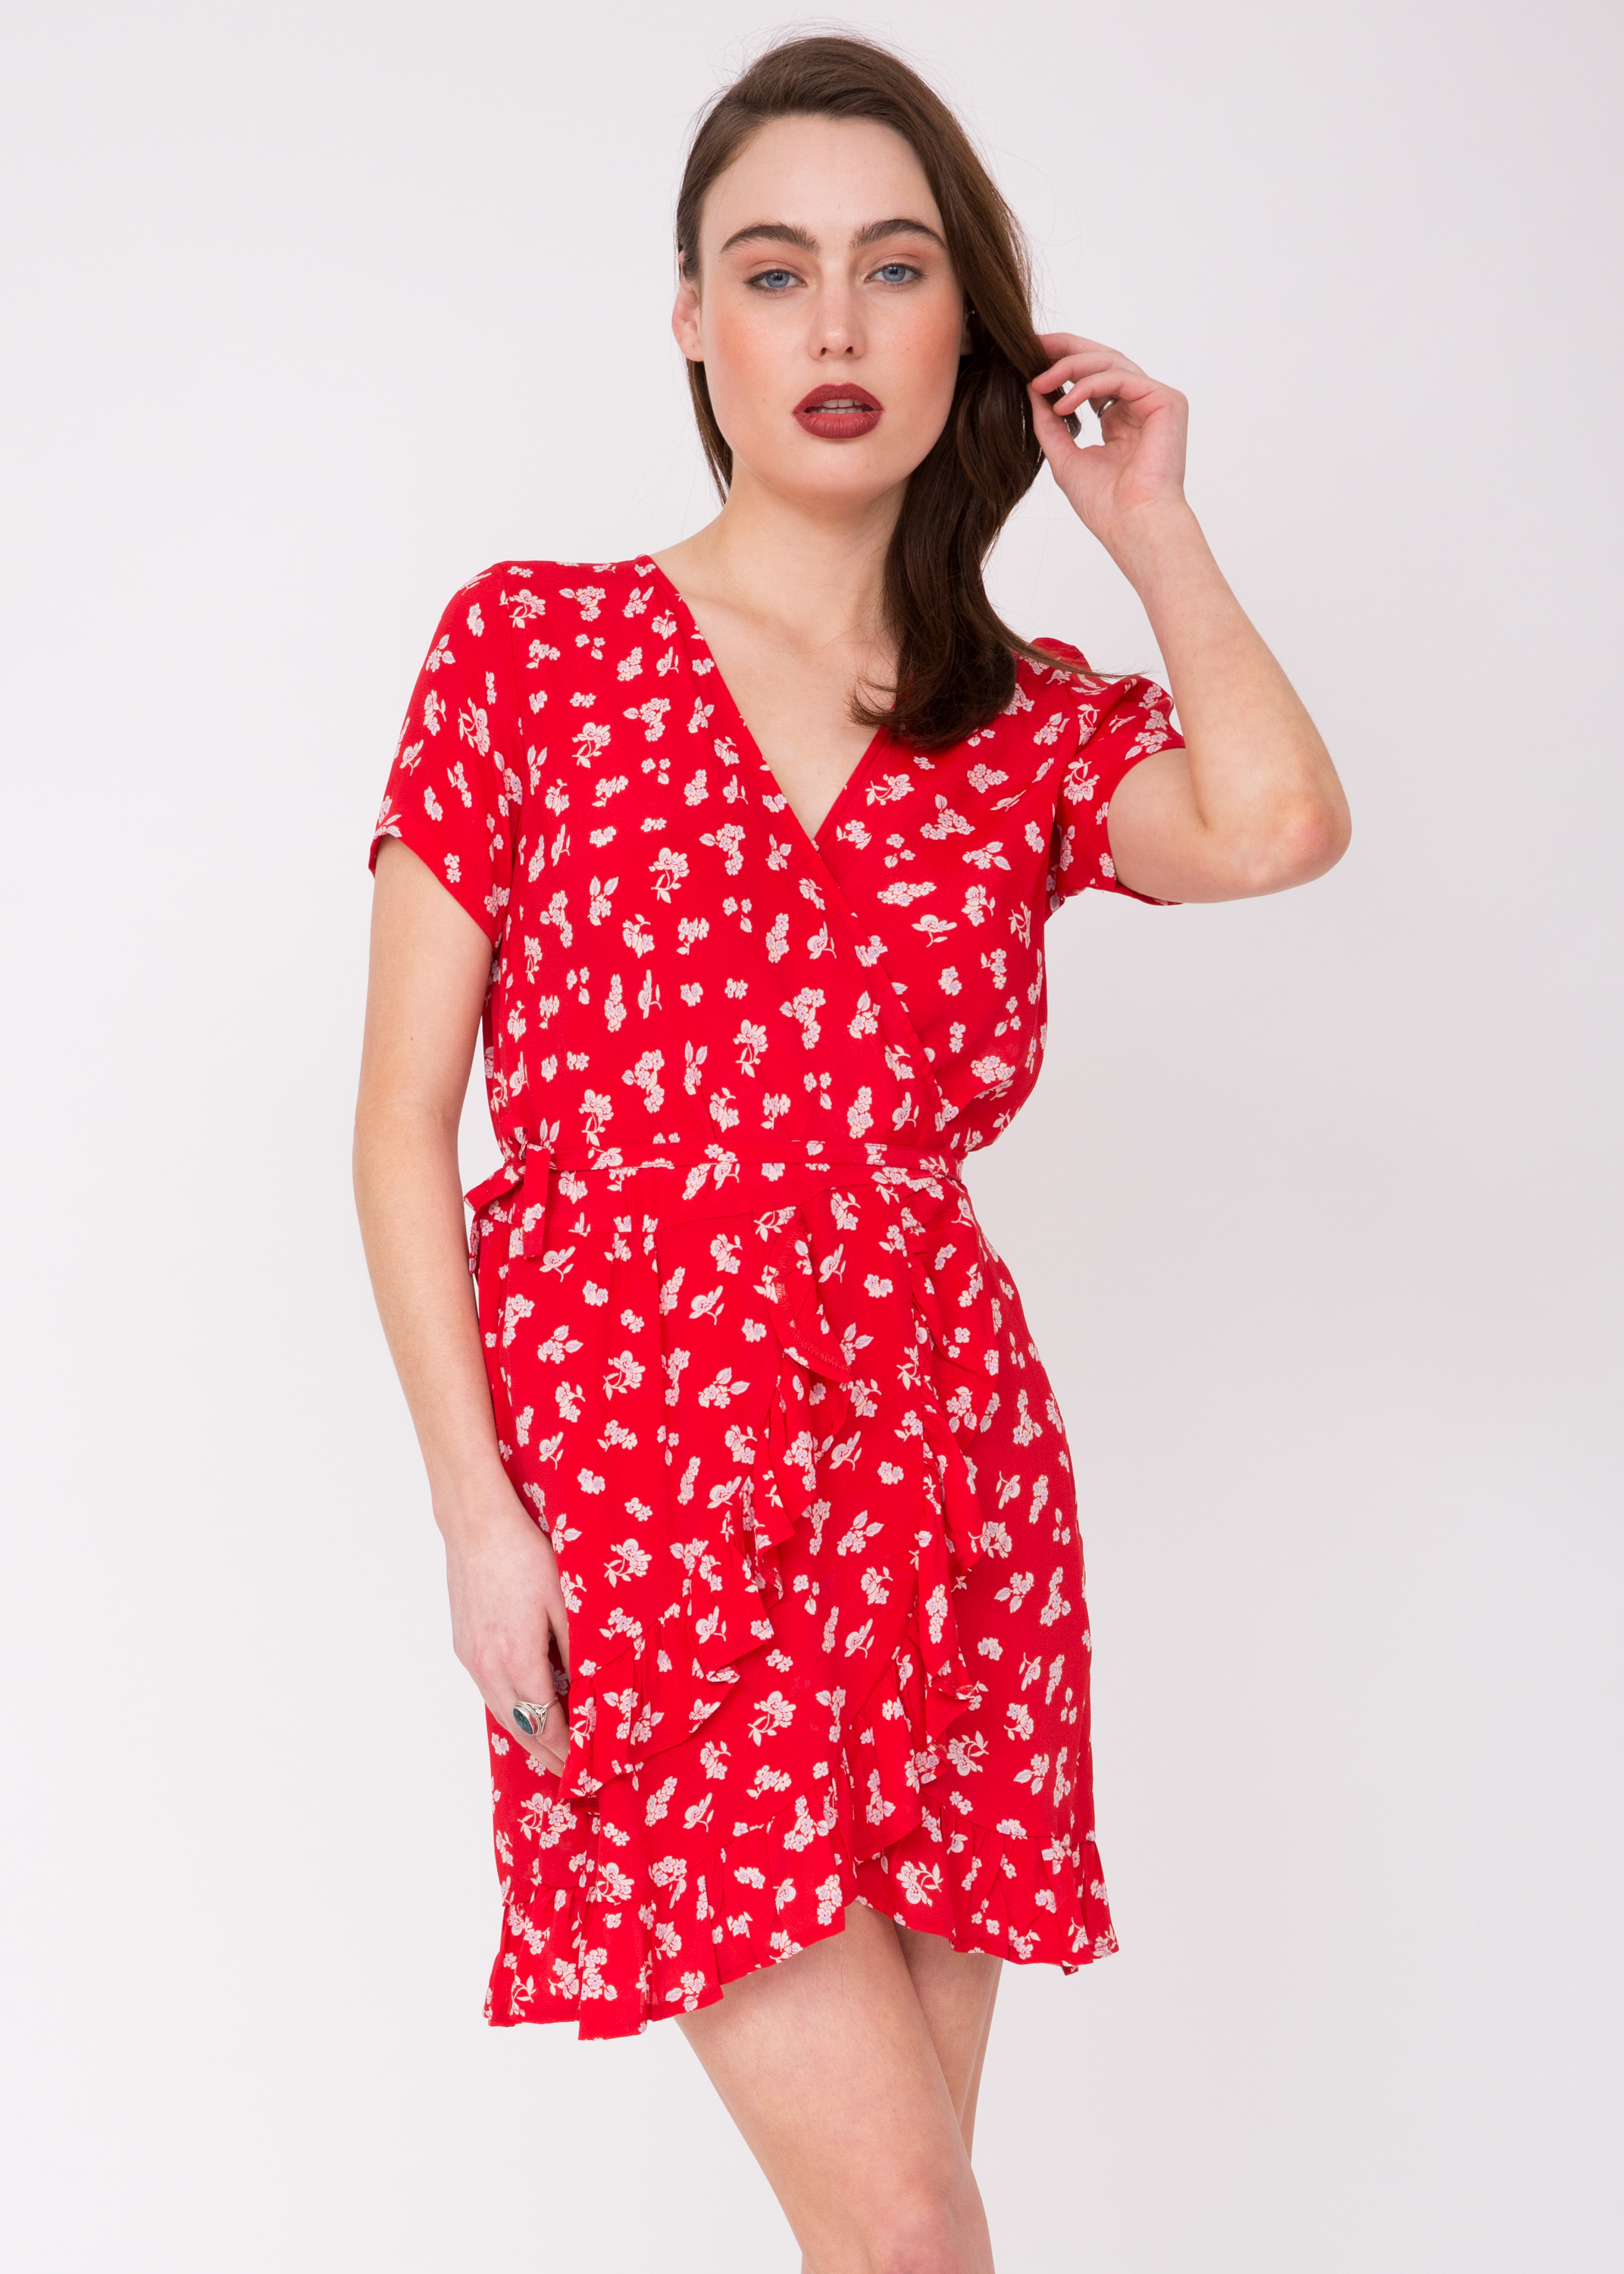 Red Ruffle Wrap Dress Outlet Shop, UP ...